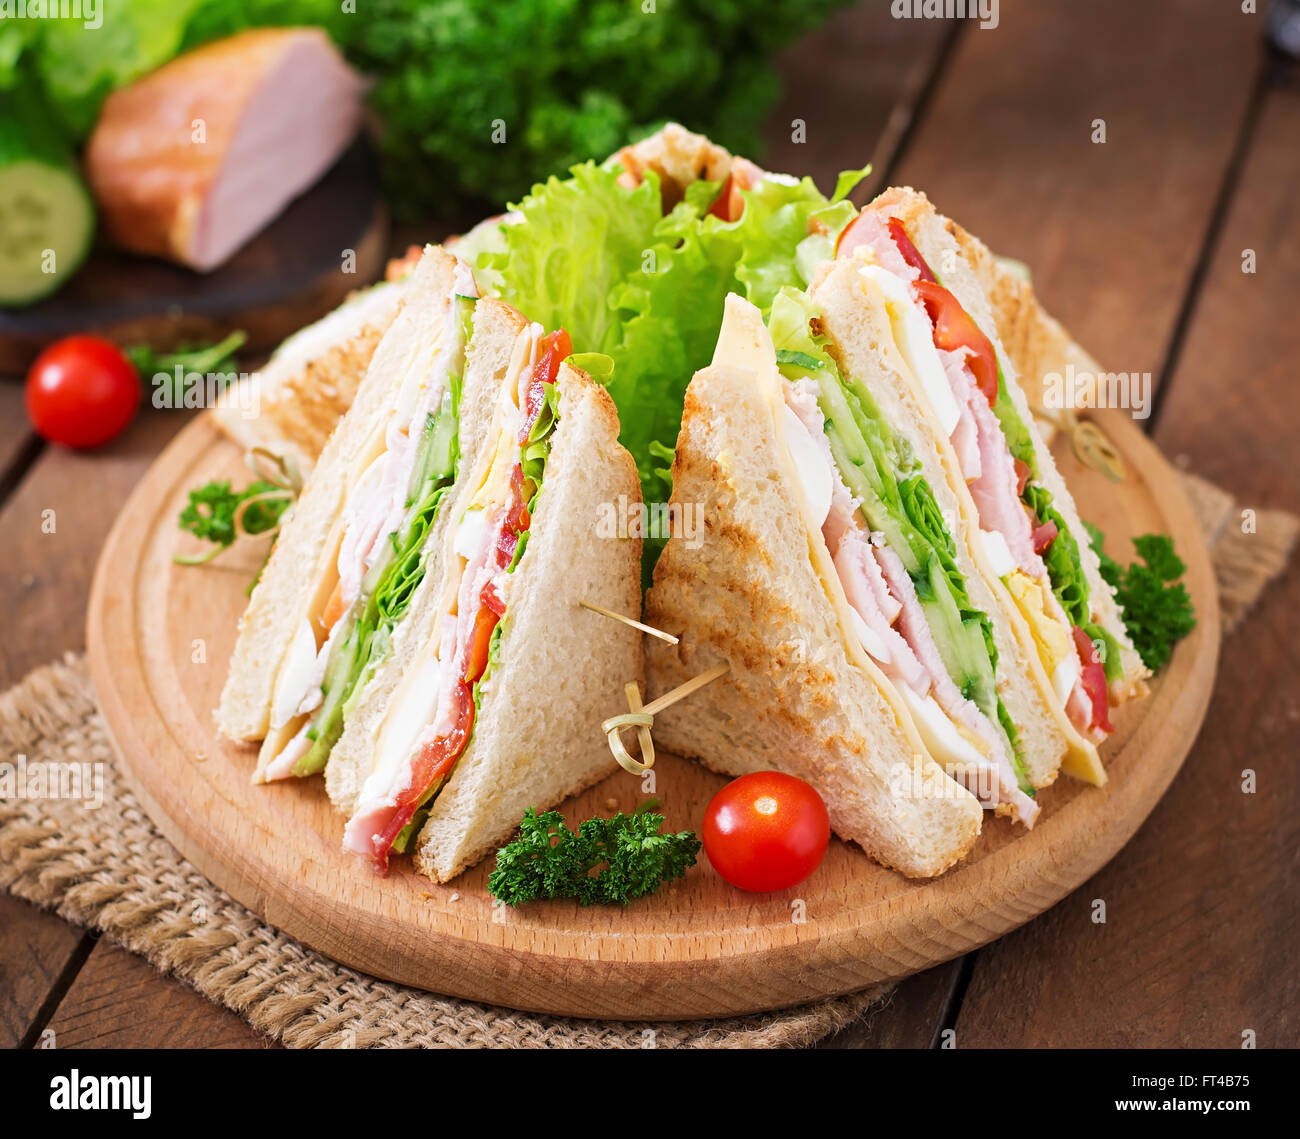 Club sandwich with cheese, cucumber, tomato, ham and eggs. Stock Photo